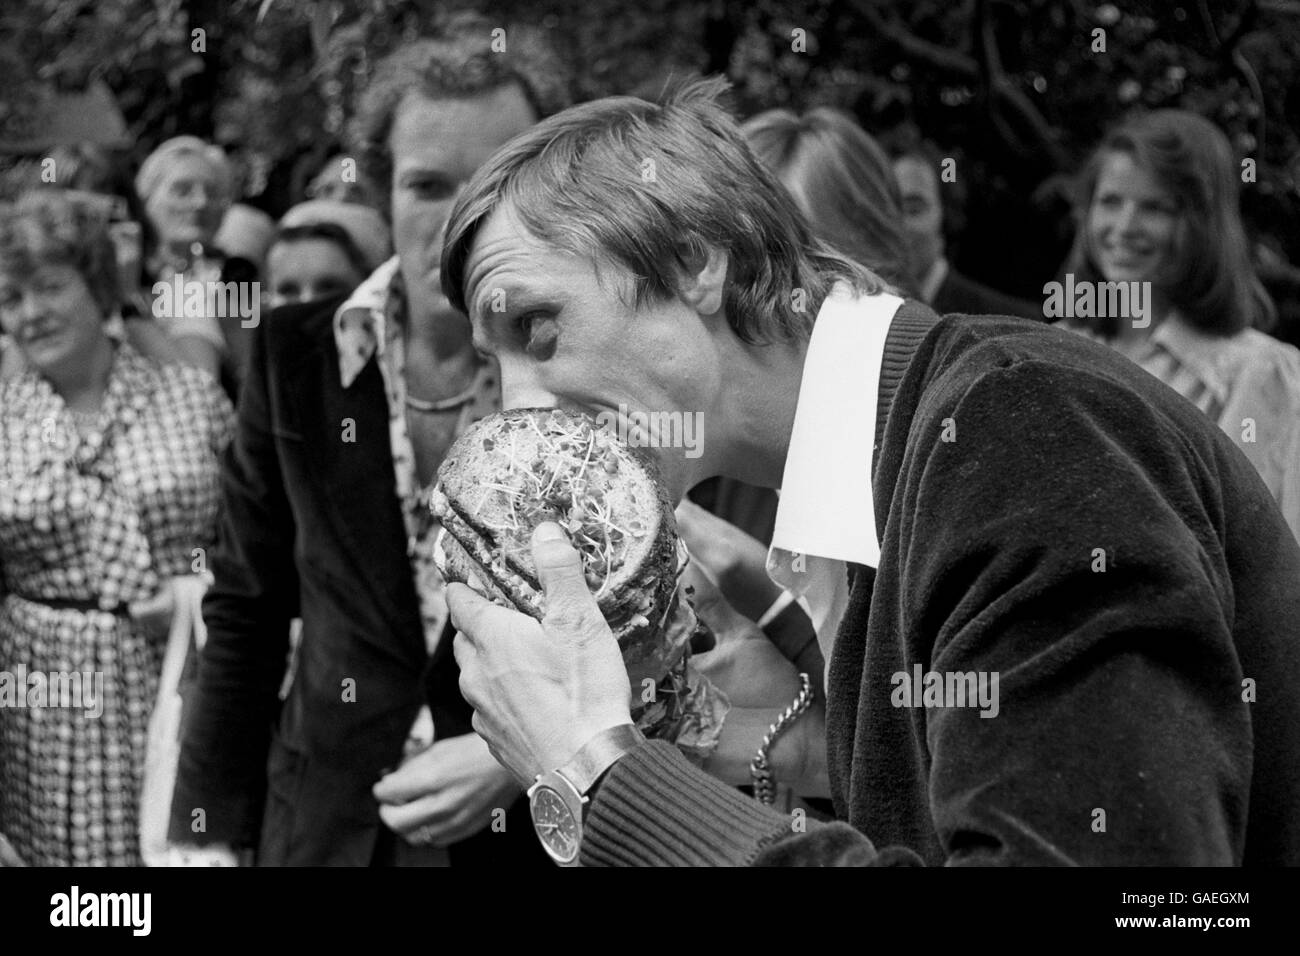 Footballing legend Johan Cruyff tucks into a giant salad sandwich after presenting The Silver Salad Bowl of Europe Challenge Trophy and winner medals to British school children at the Royal Netherlands Embassy. The trophy was awarded for the best essay on 'Holland, the salad bowl of Europe'. Stock Photo